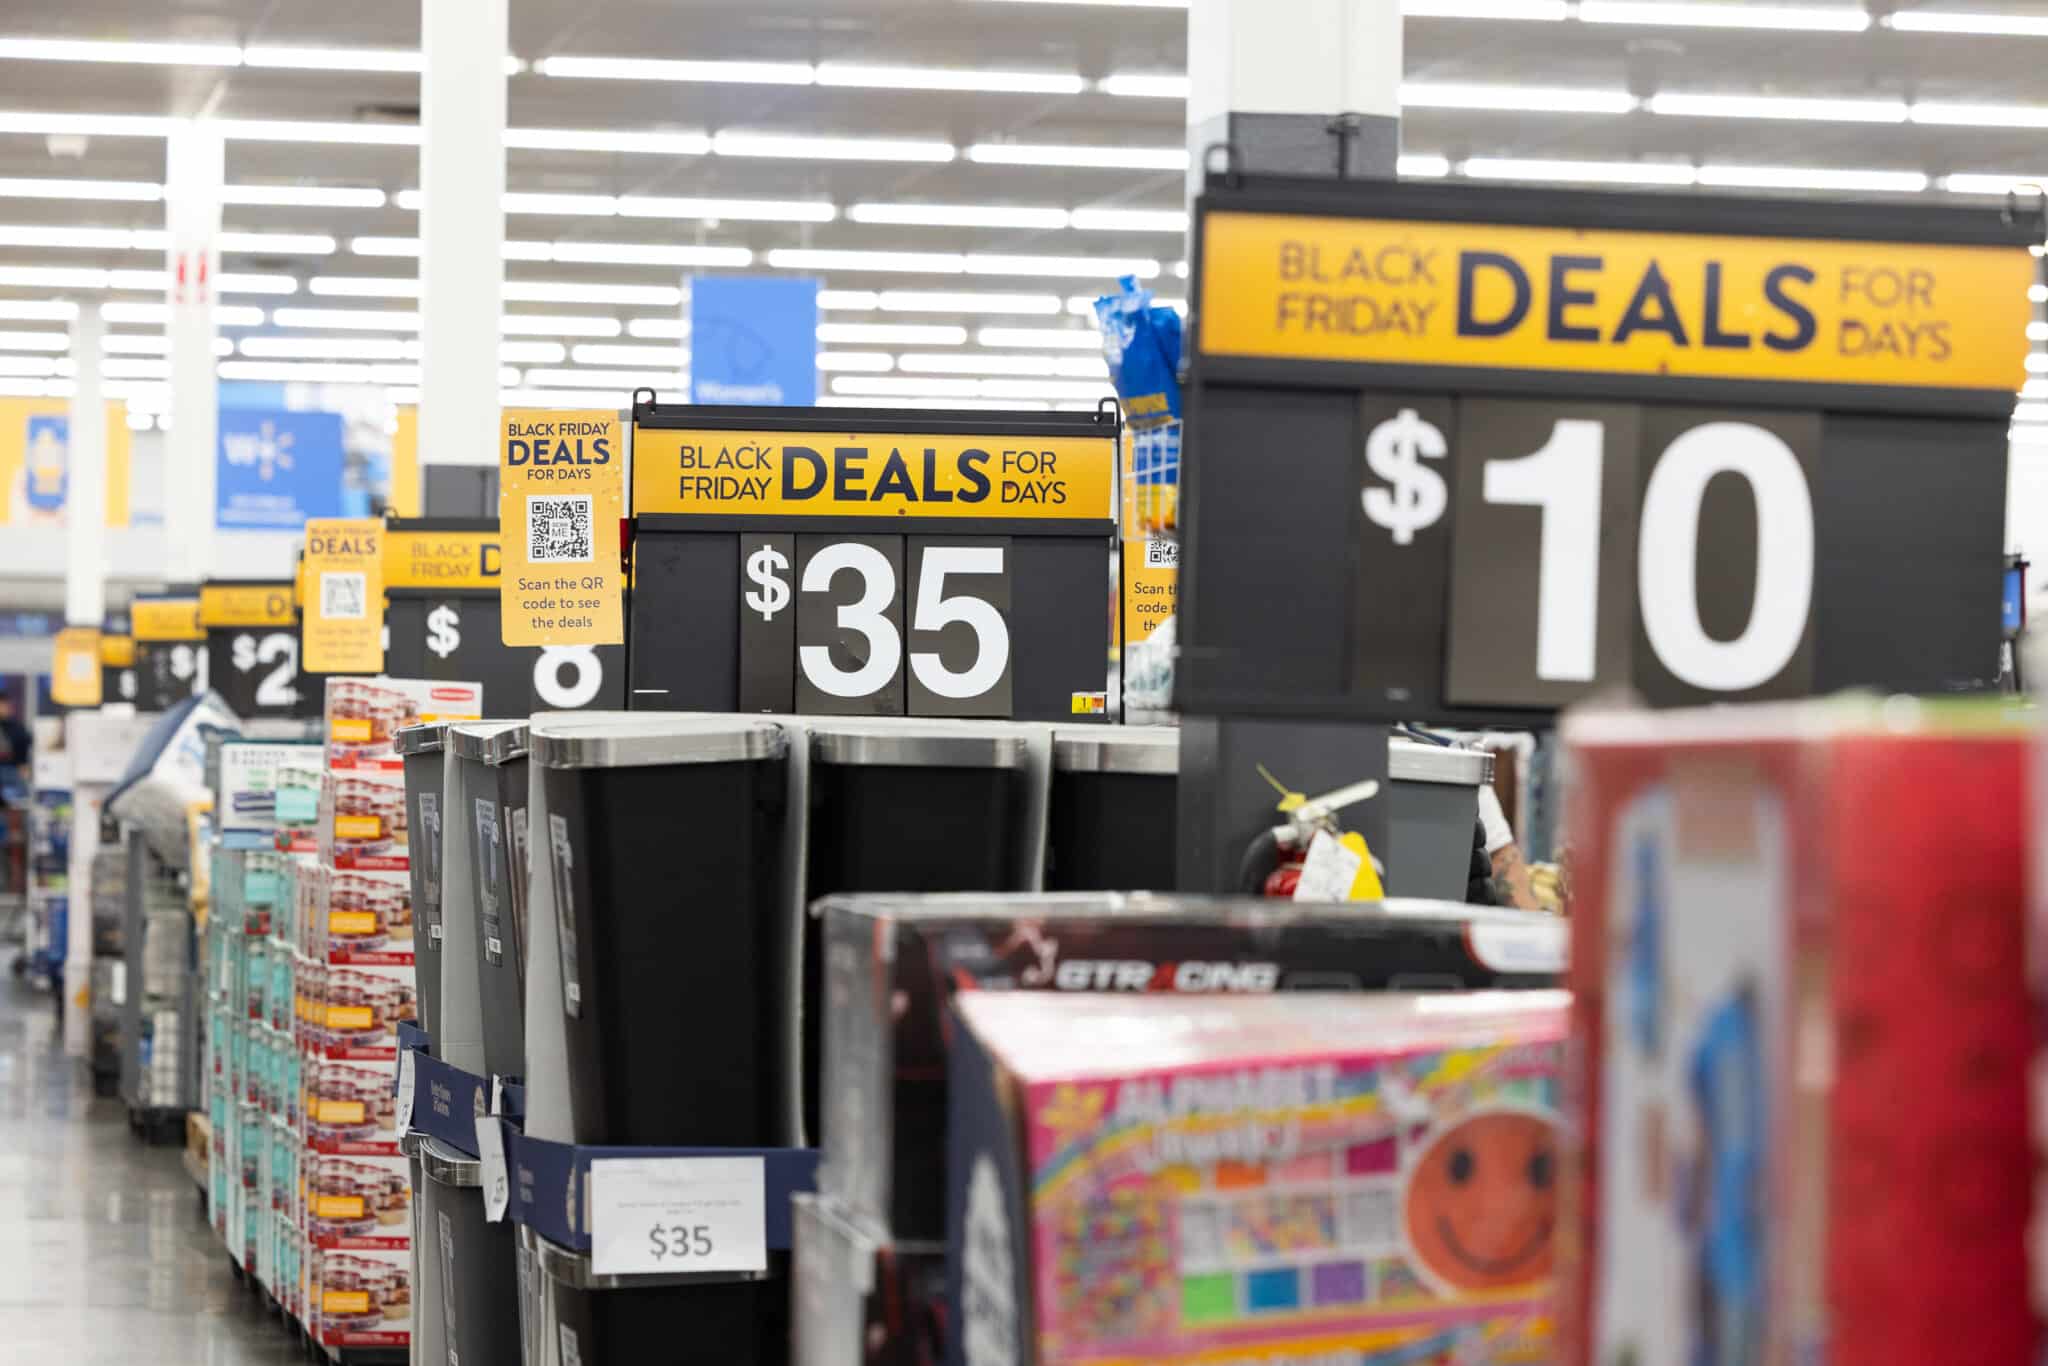 DUNWOODY, GA - NOVEMBER 25: Shoppers walk the aisles of Wal-Mart for Black Friday deals on November 25, 2022 in Dunwoody, Georgia. Walmart opened at 6am on Black Friday for shoppers. (Photo by Jessica McGowan/Getty Images)